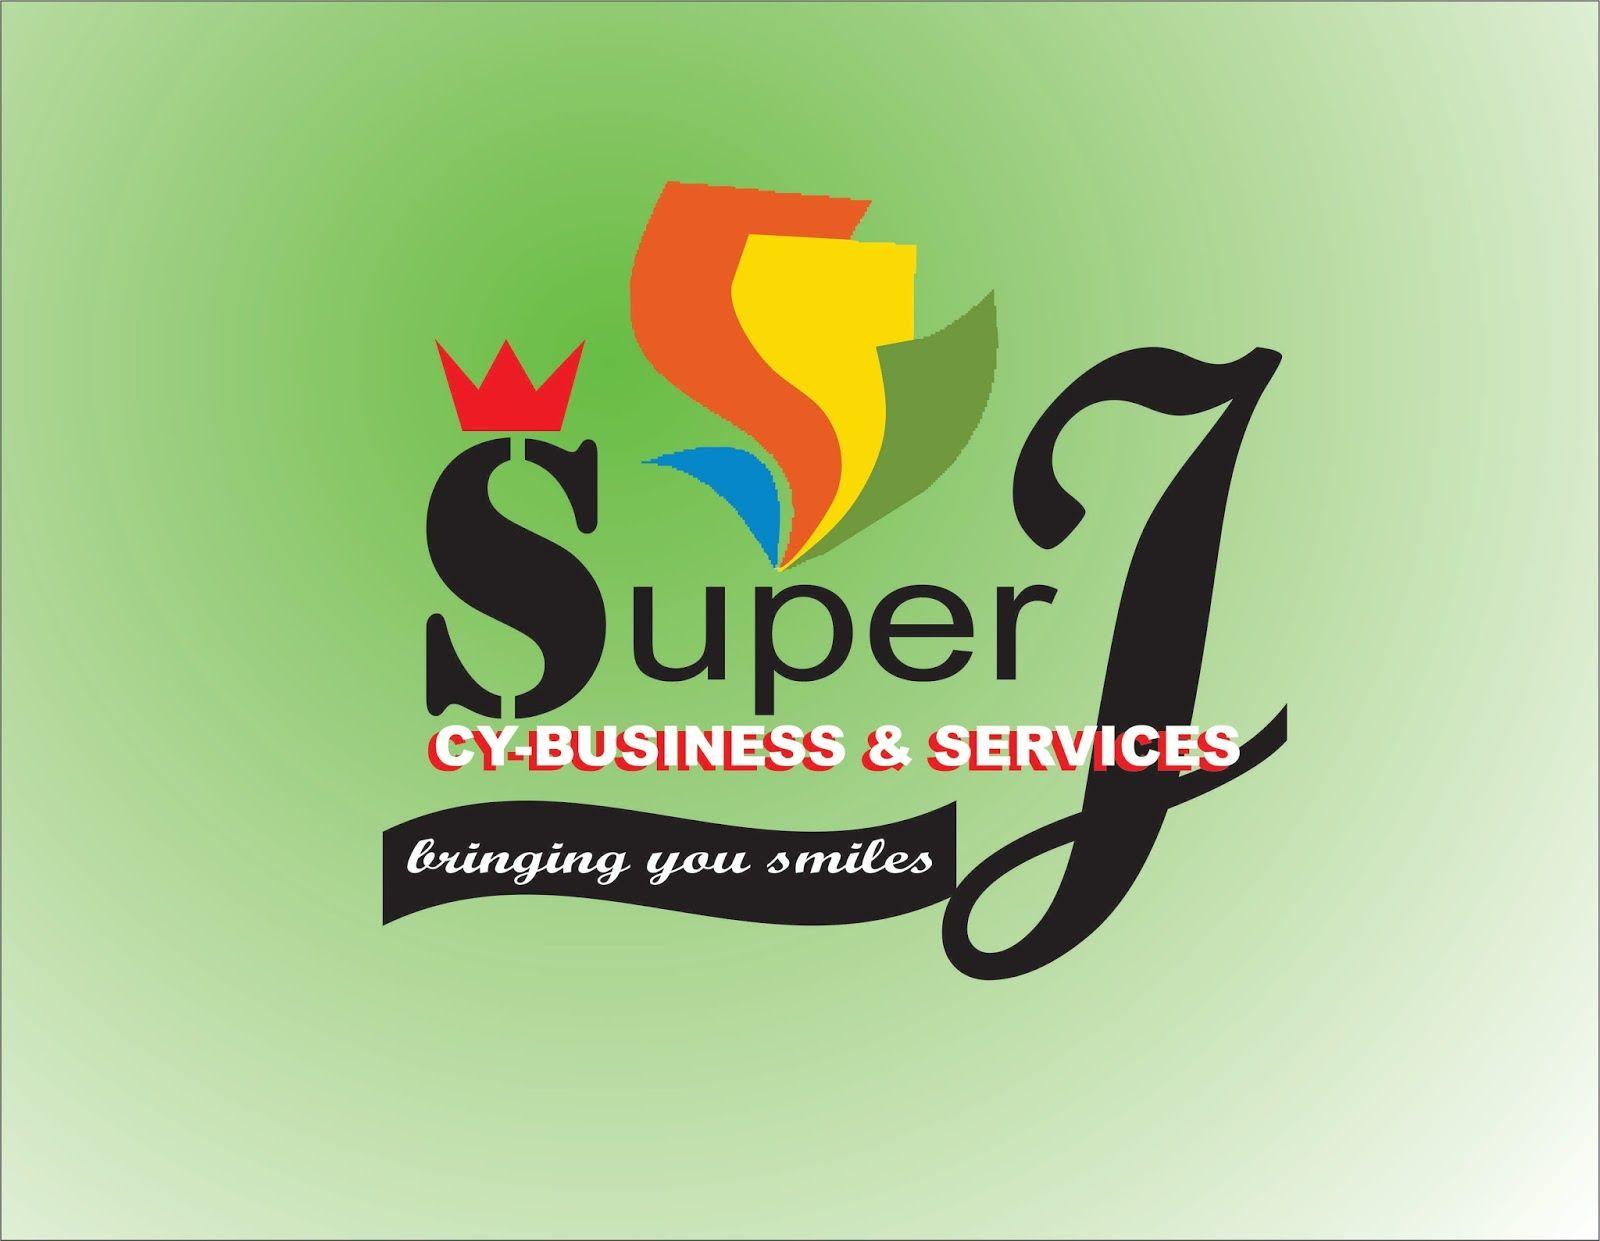 Super J Logo - SUPER J CY BUSINESS AND SERVICES: March 2018